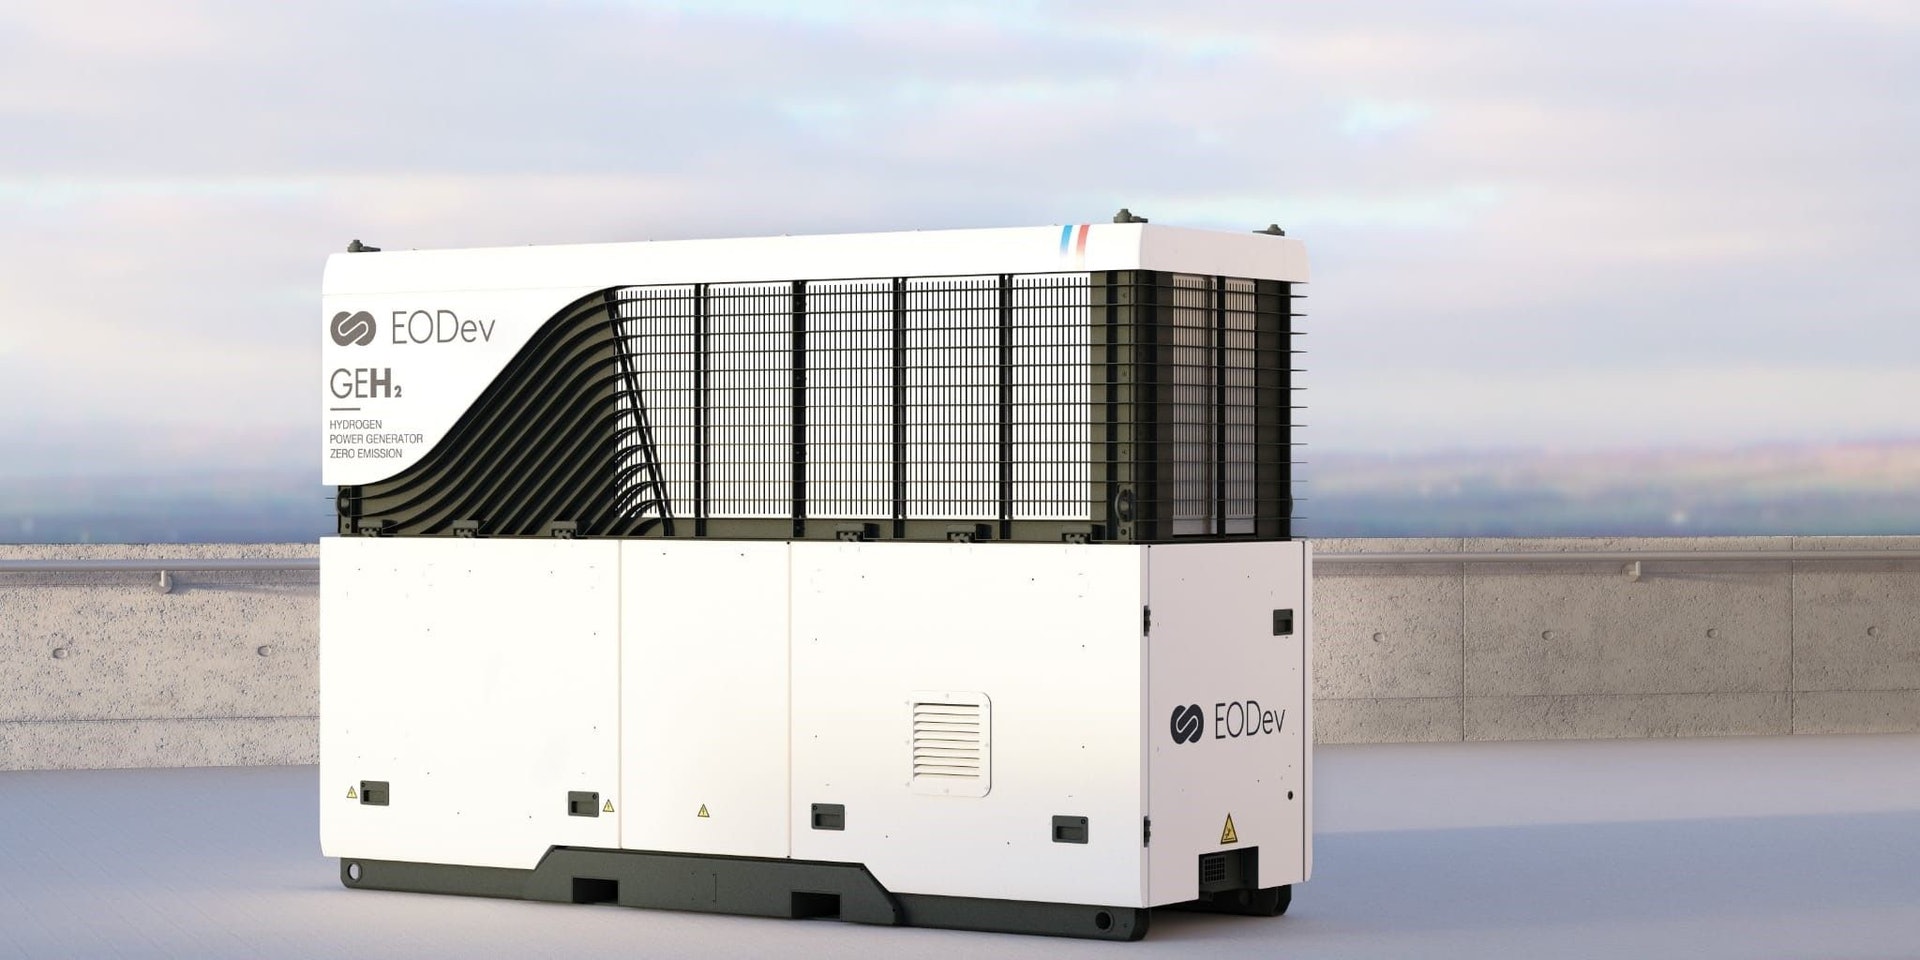 United Rentals plans to add EODev GEH2 fuel cell electro-hydrogen generators to its fleet.